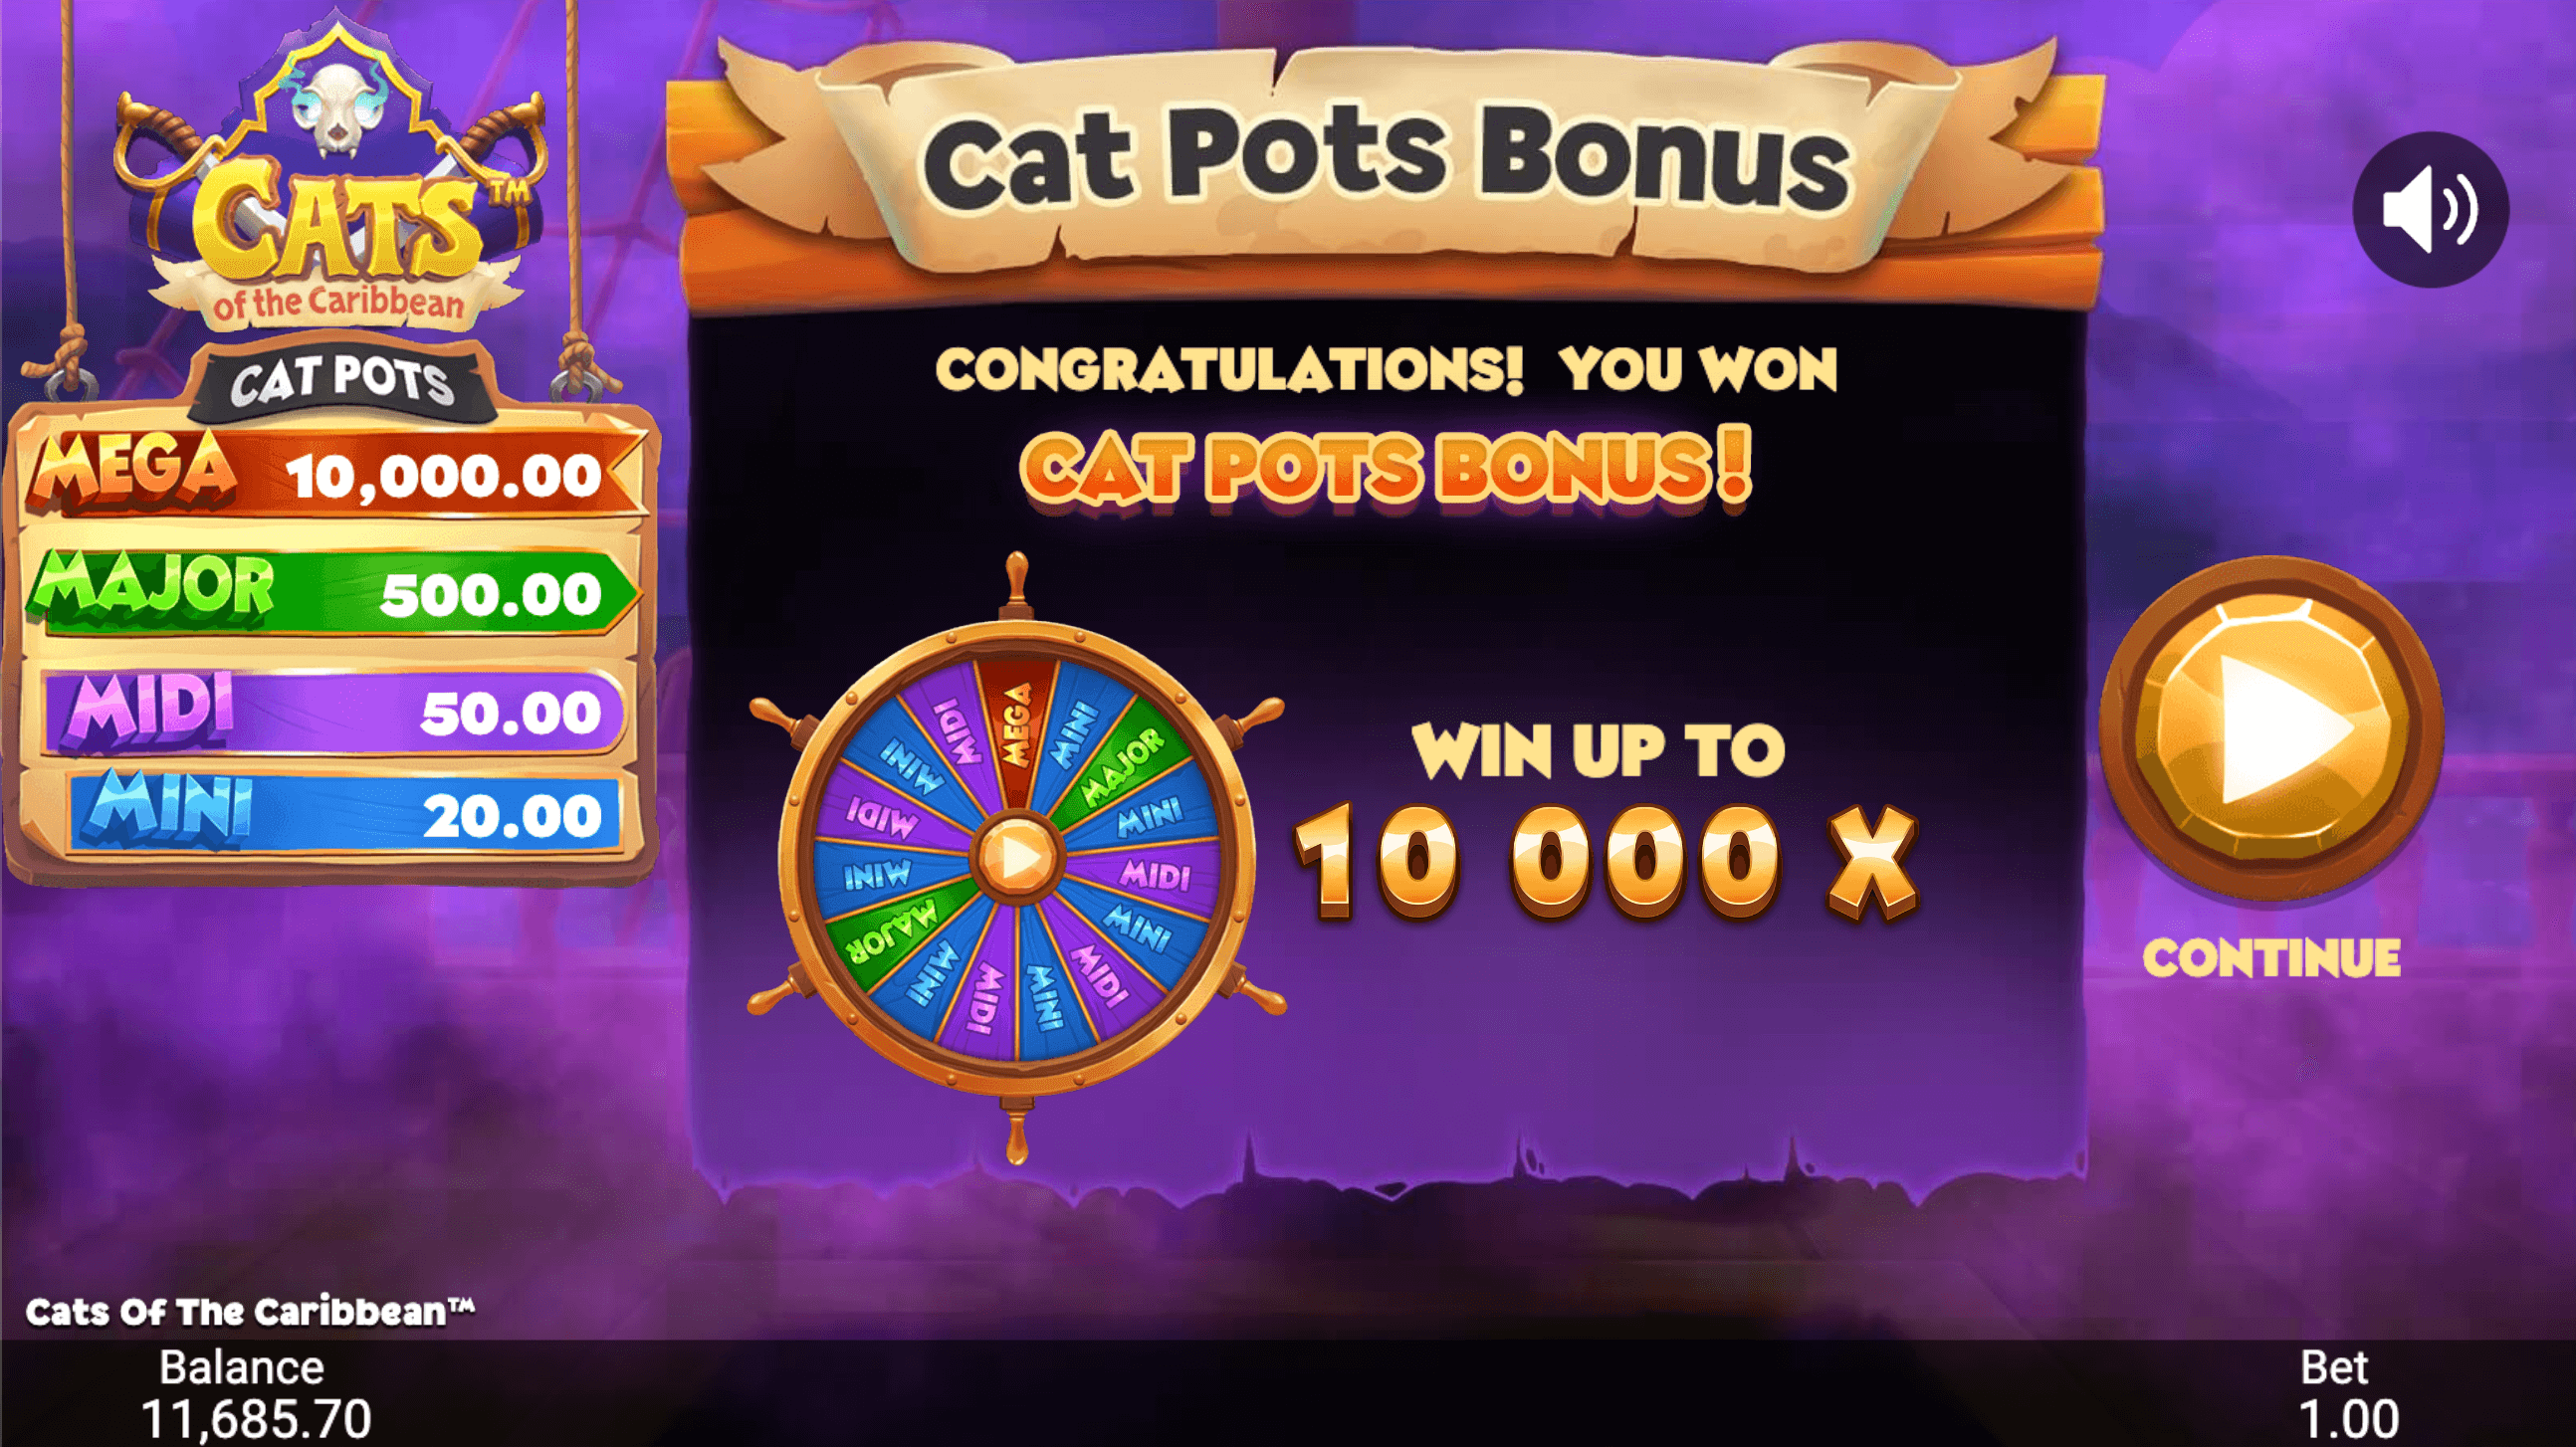 Cats of the Caribbean slot